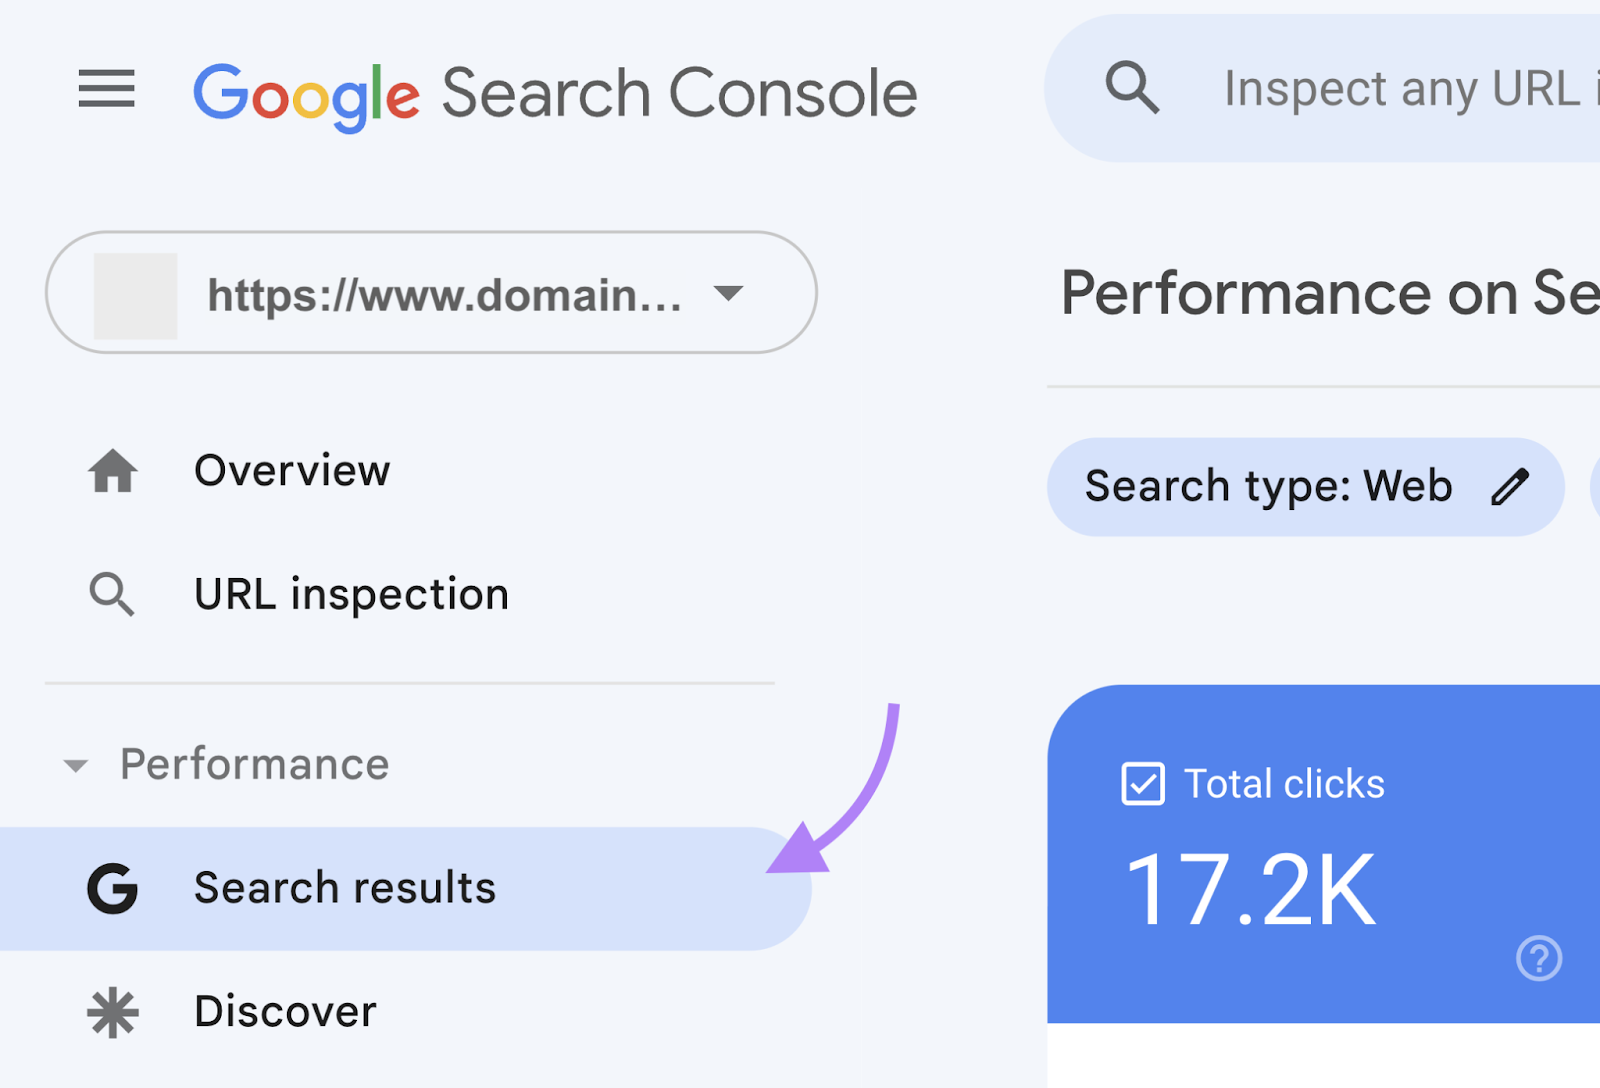 click on “Search results” in Google Search Console